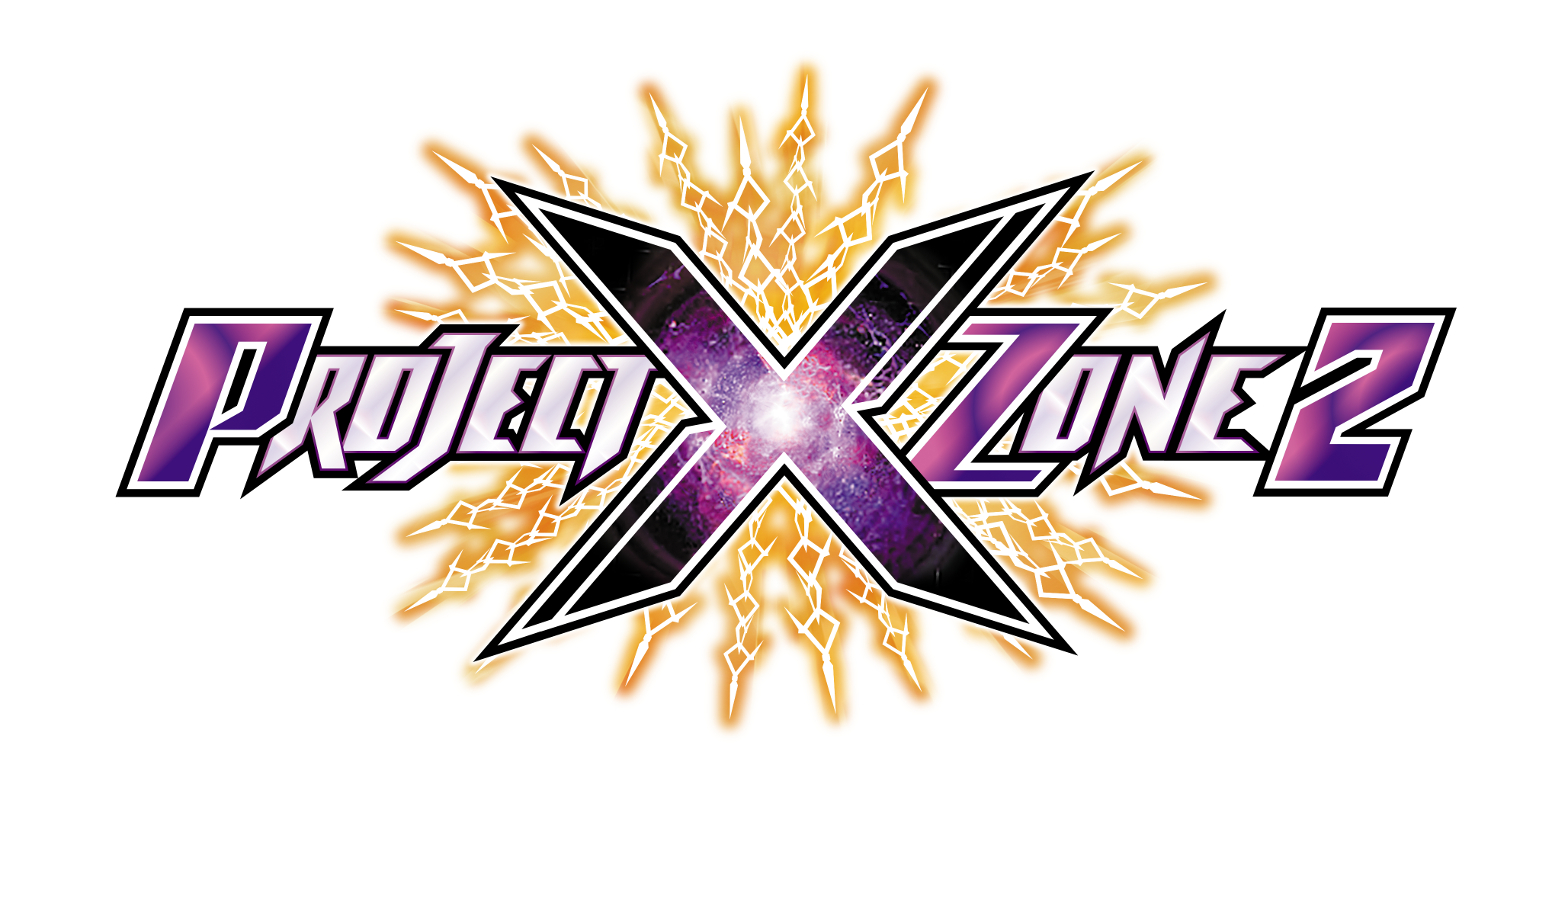 download project x zone 3